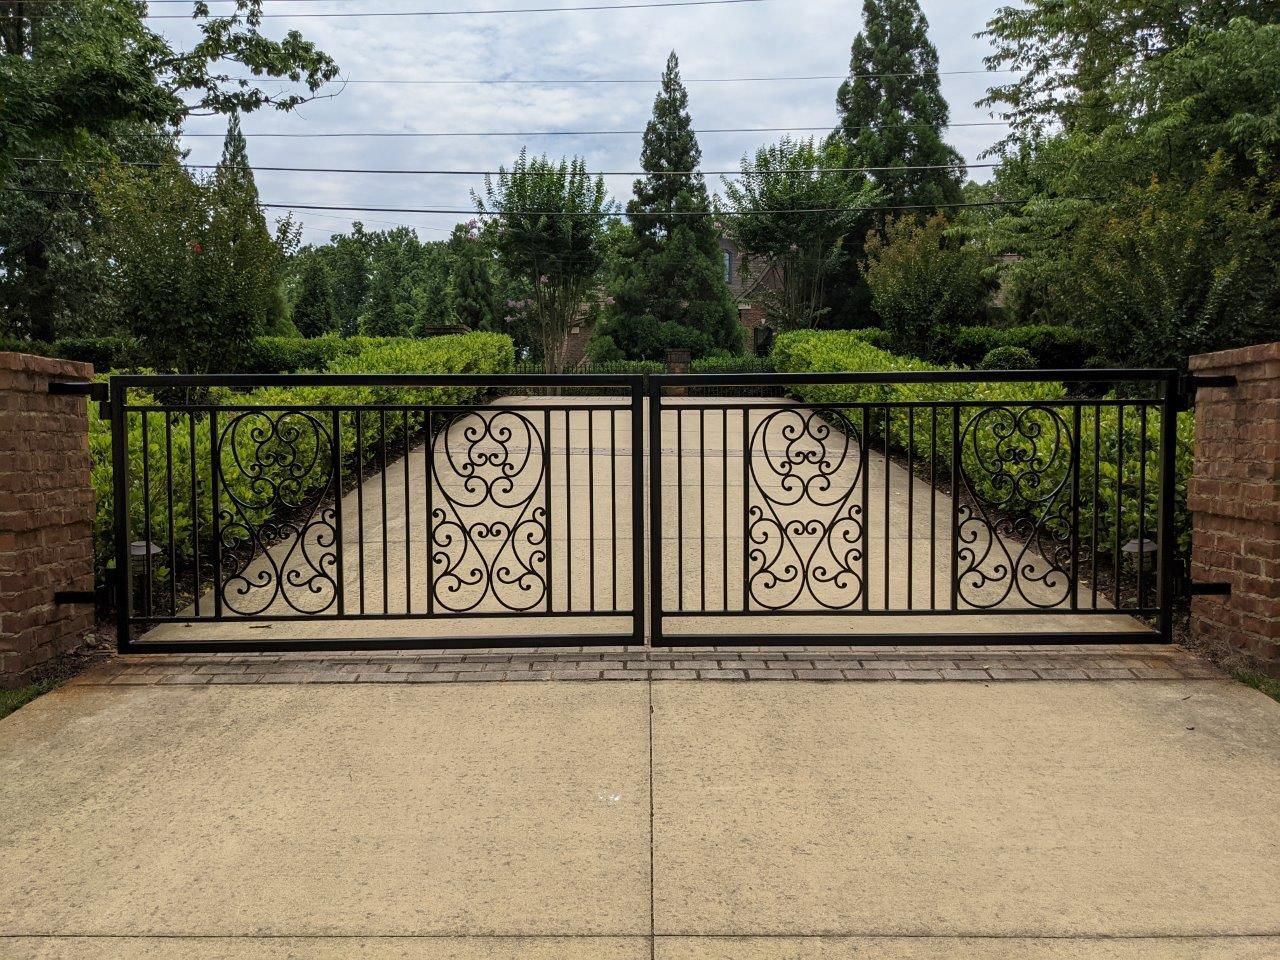 A wrought iron gate built by Greater Western Fence leading to a driveway with trees in the background